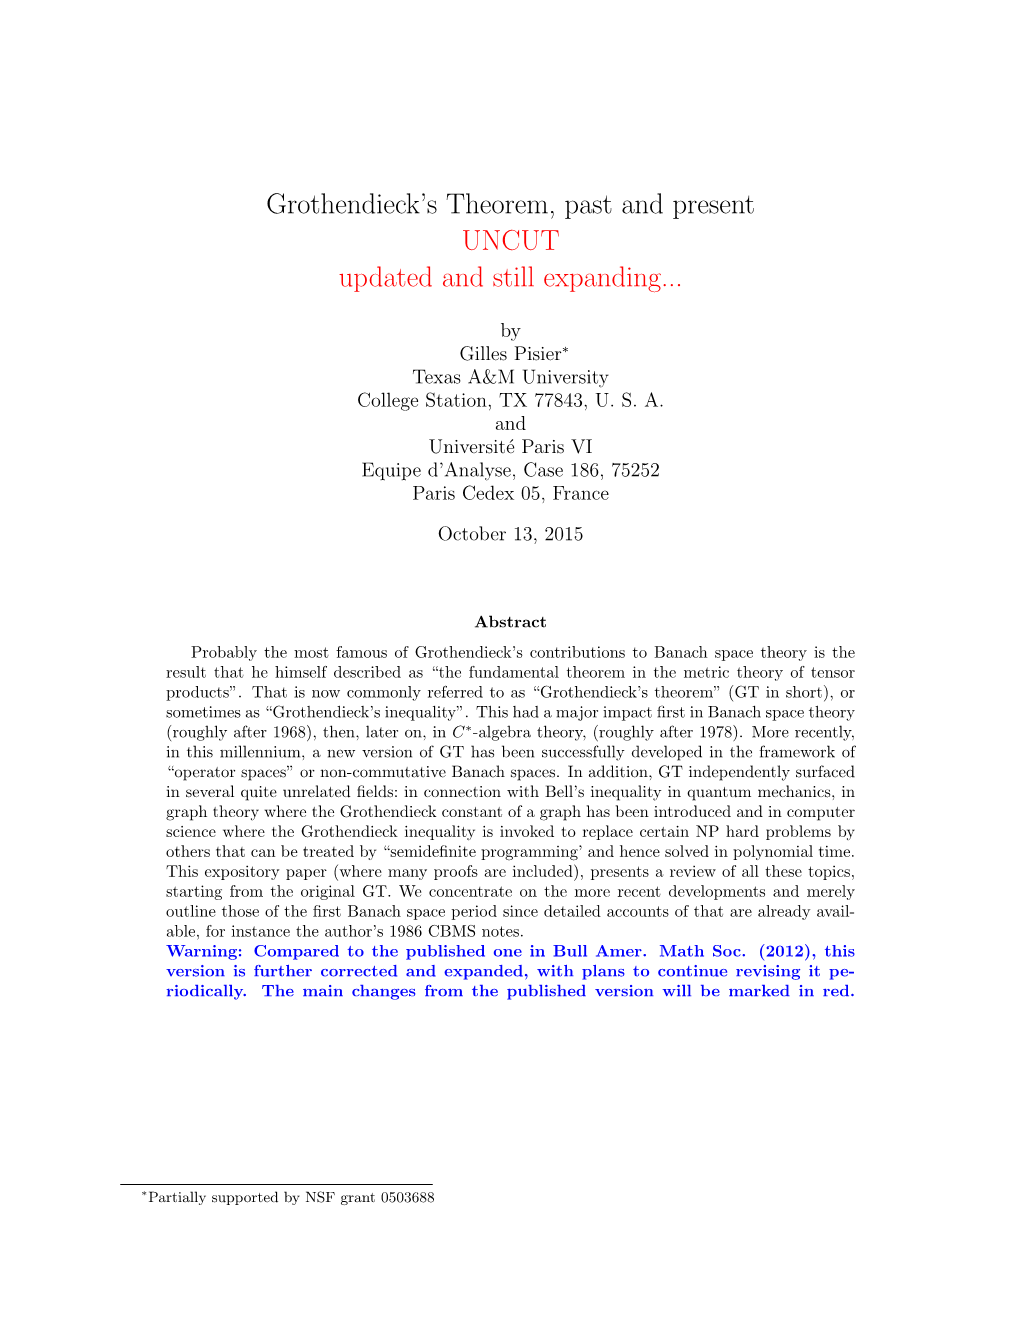 Grothendieck's Theorem, Past and Present UNCUT Updated and Still Expanding